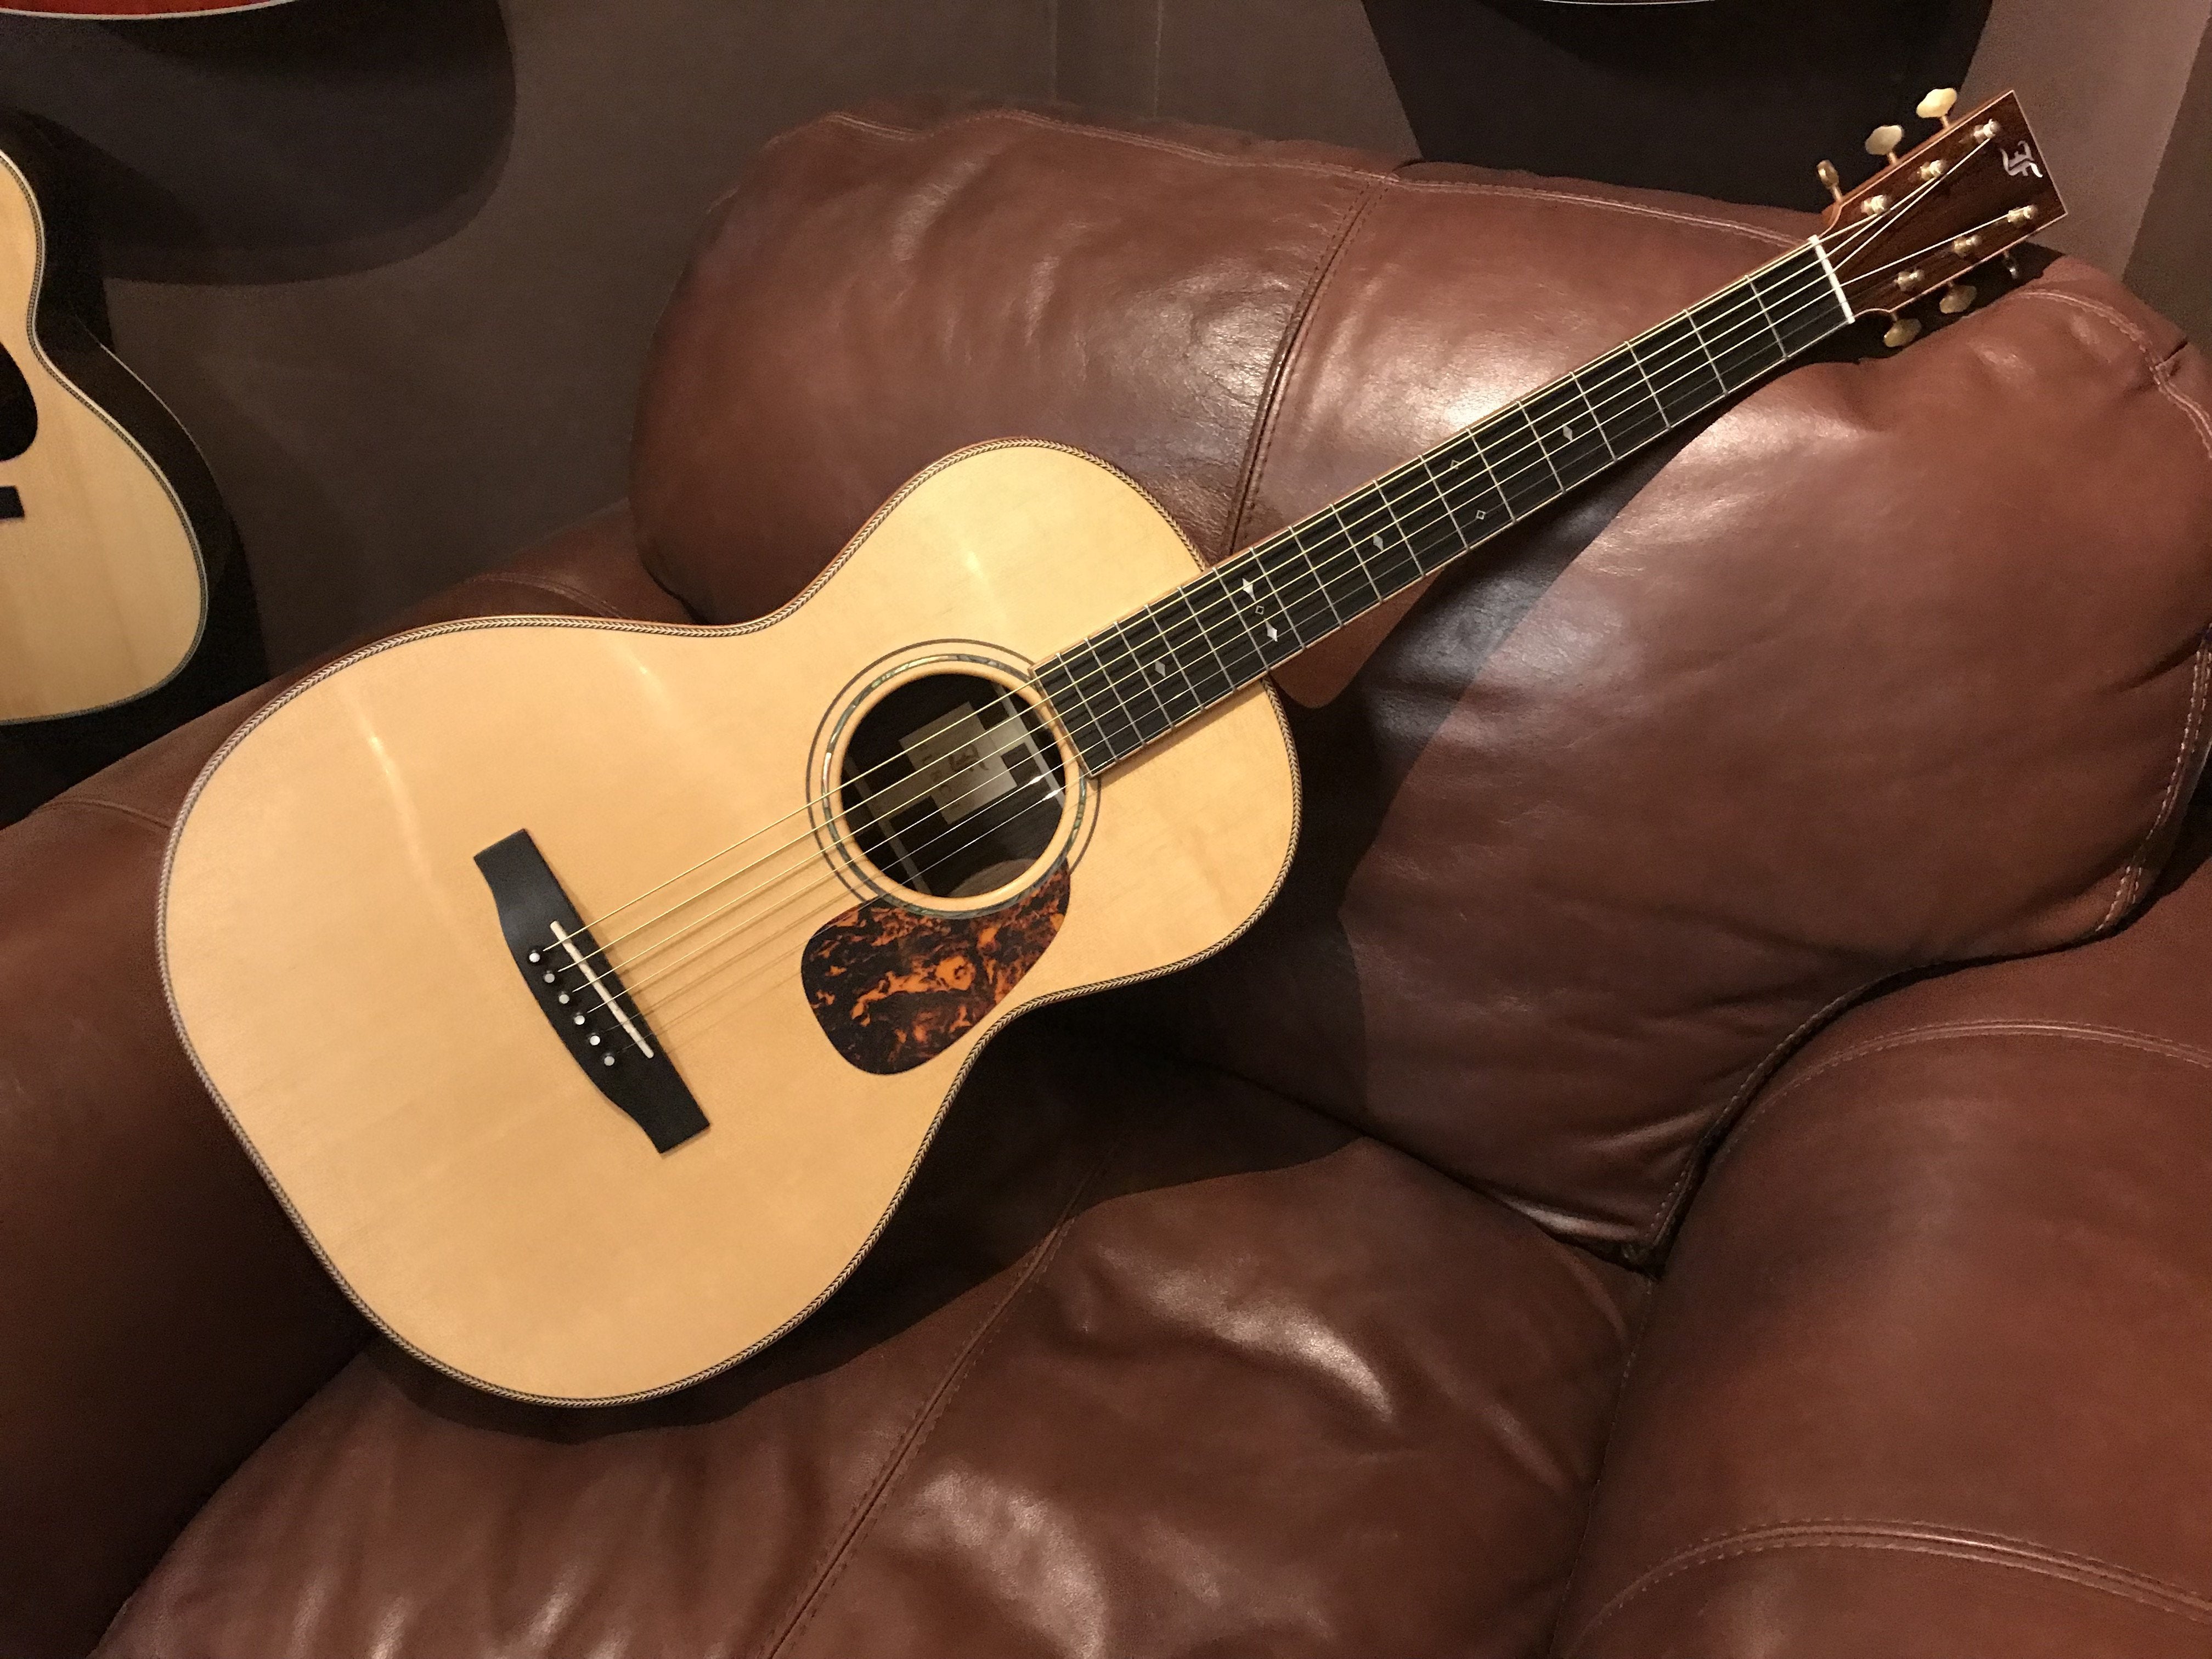 Furch Vintage 2 OOM SR Inc. Over £100 of Quality Control, Personalised Setup & Follow Up Services, Acoustic Guitar for sale at Richards Guitars.